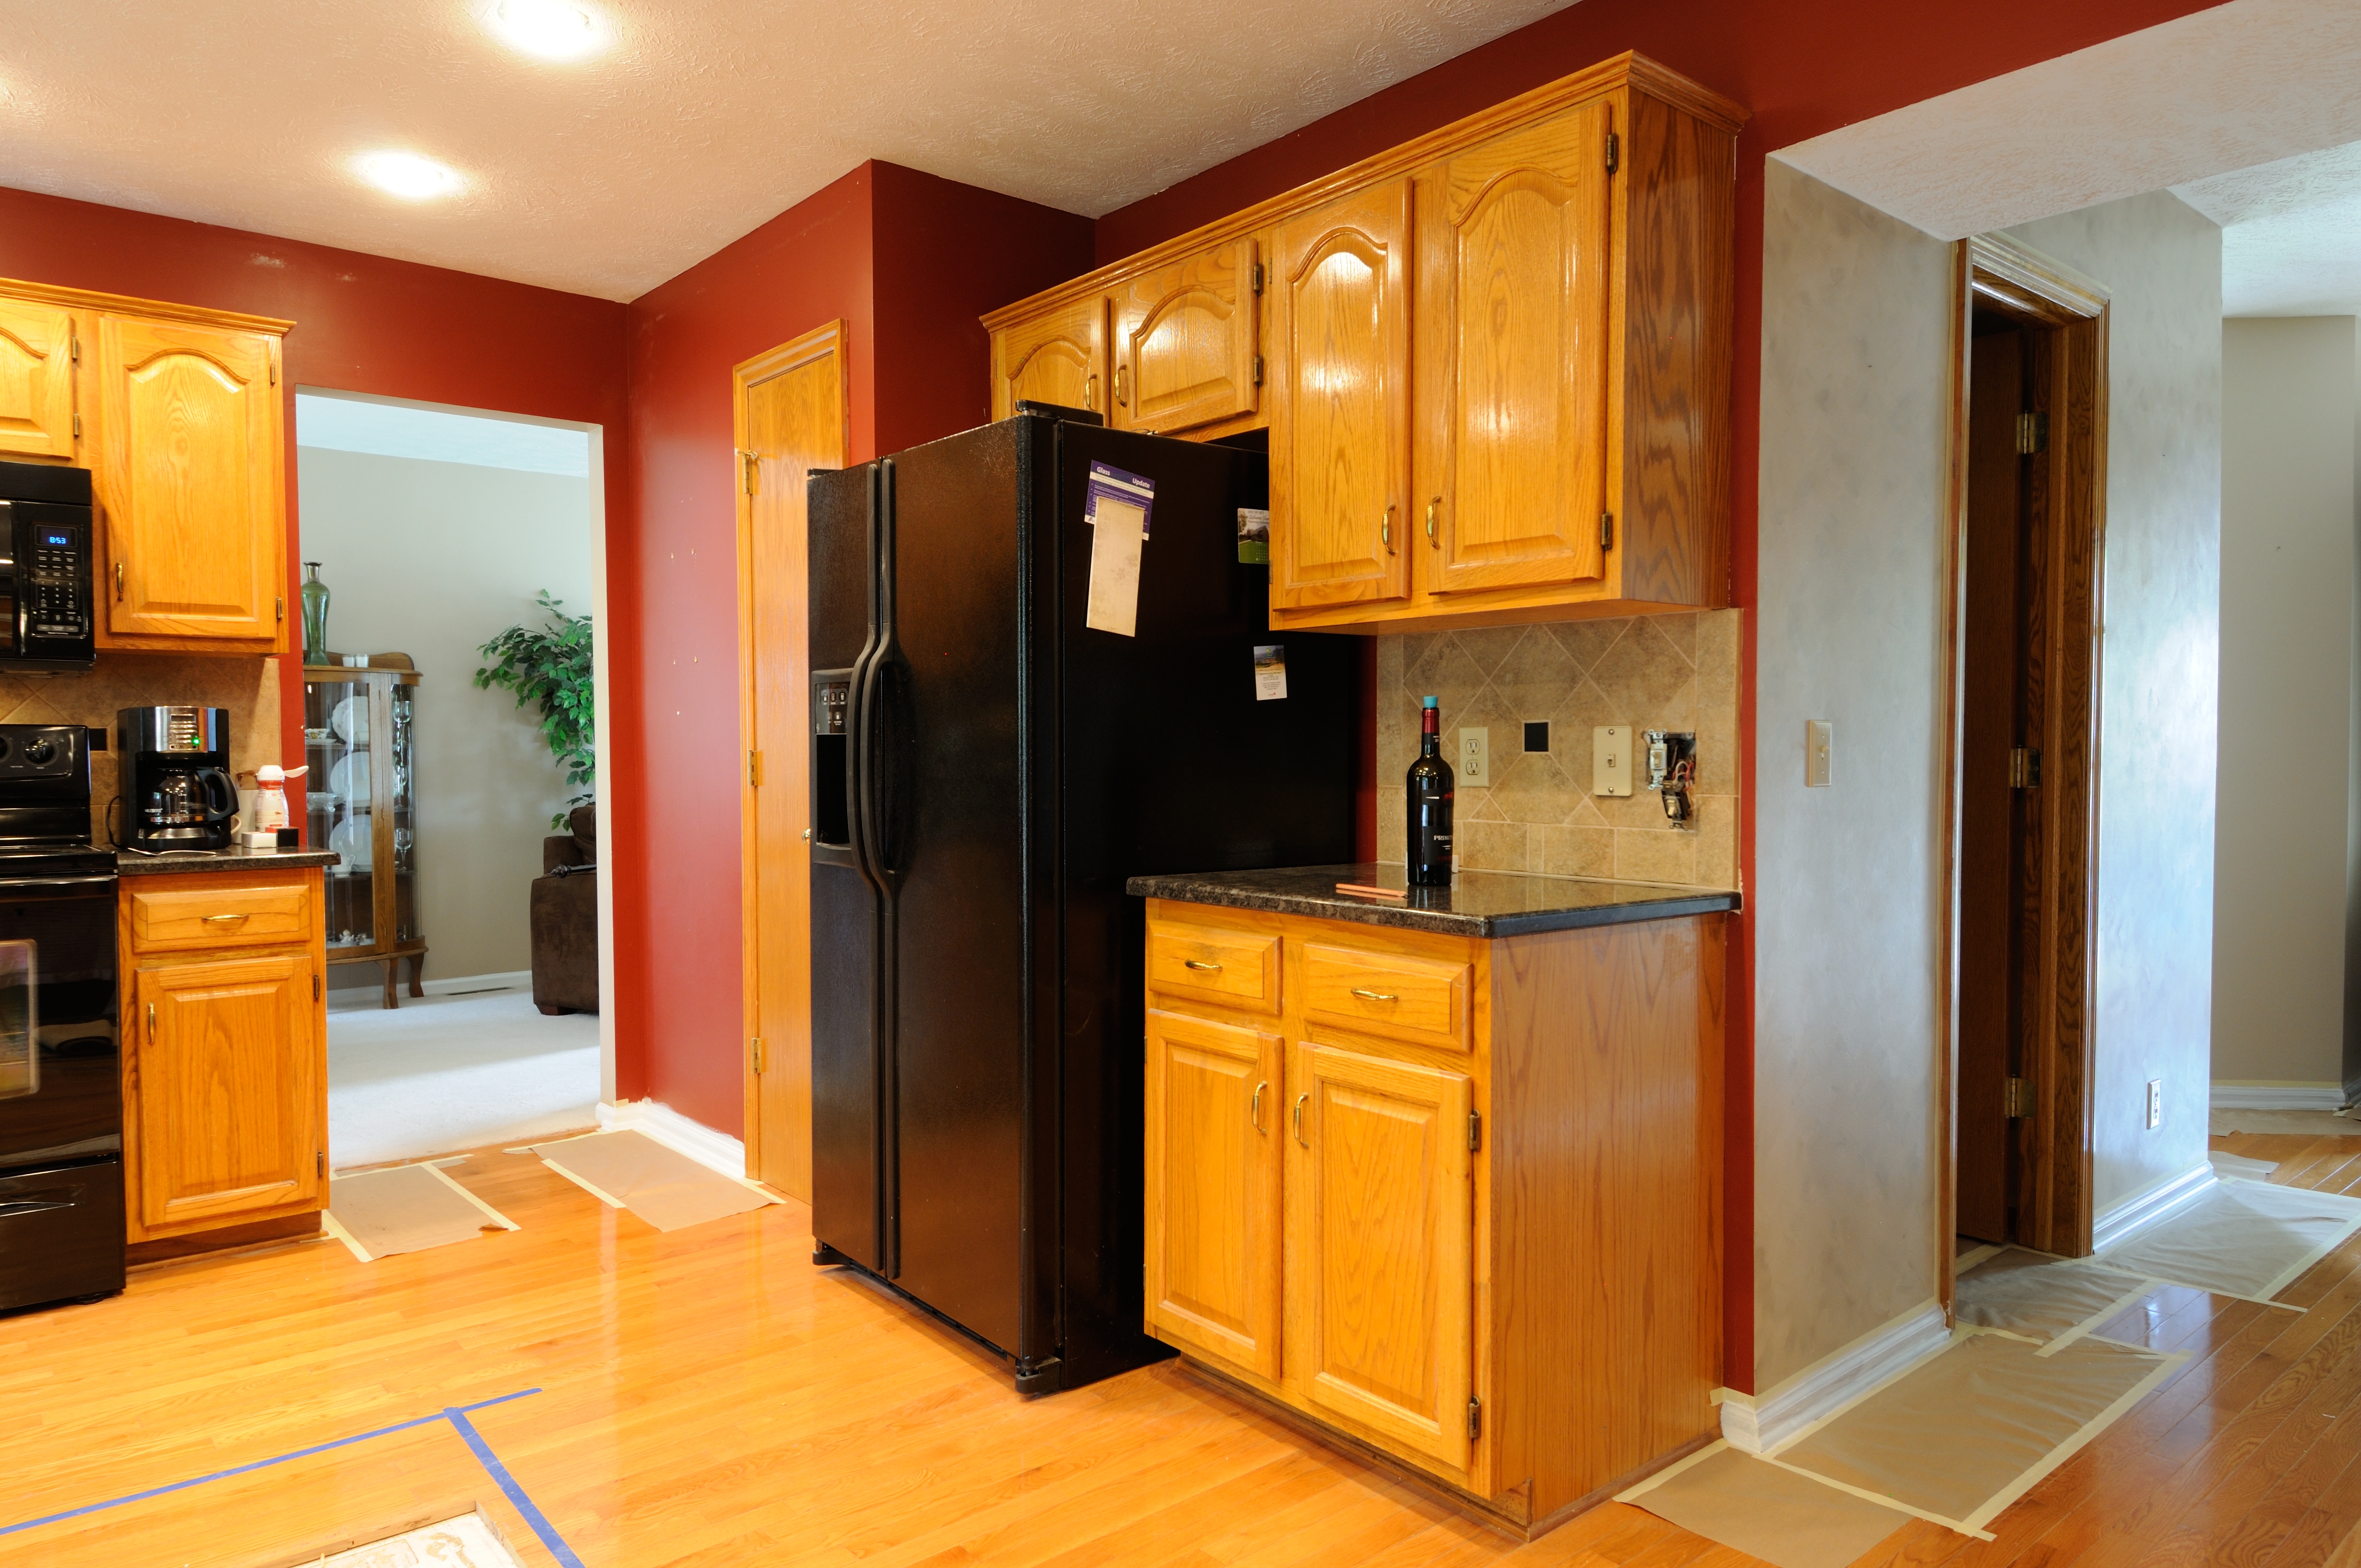 How To Make Golden Oak Cabinets Look Modern Without Refinishing